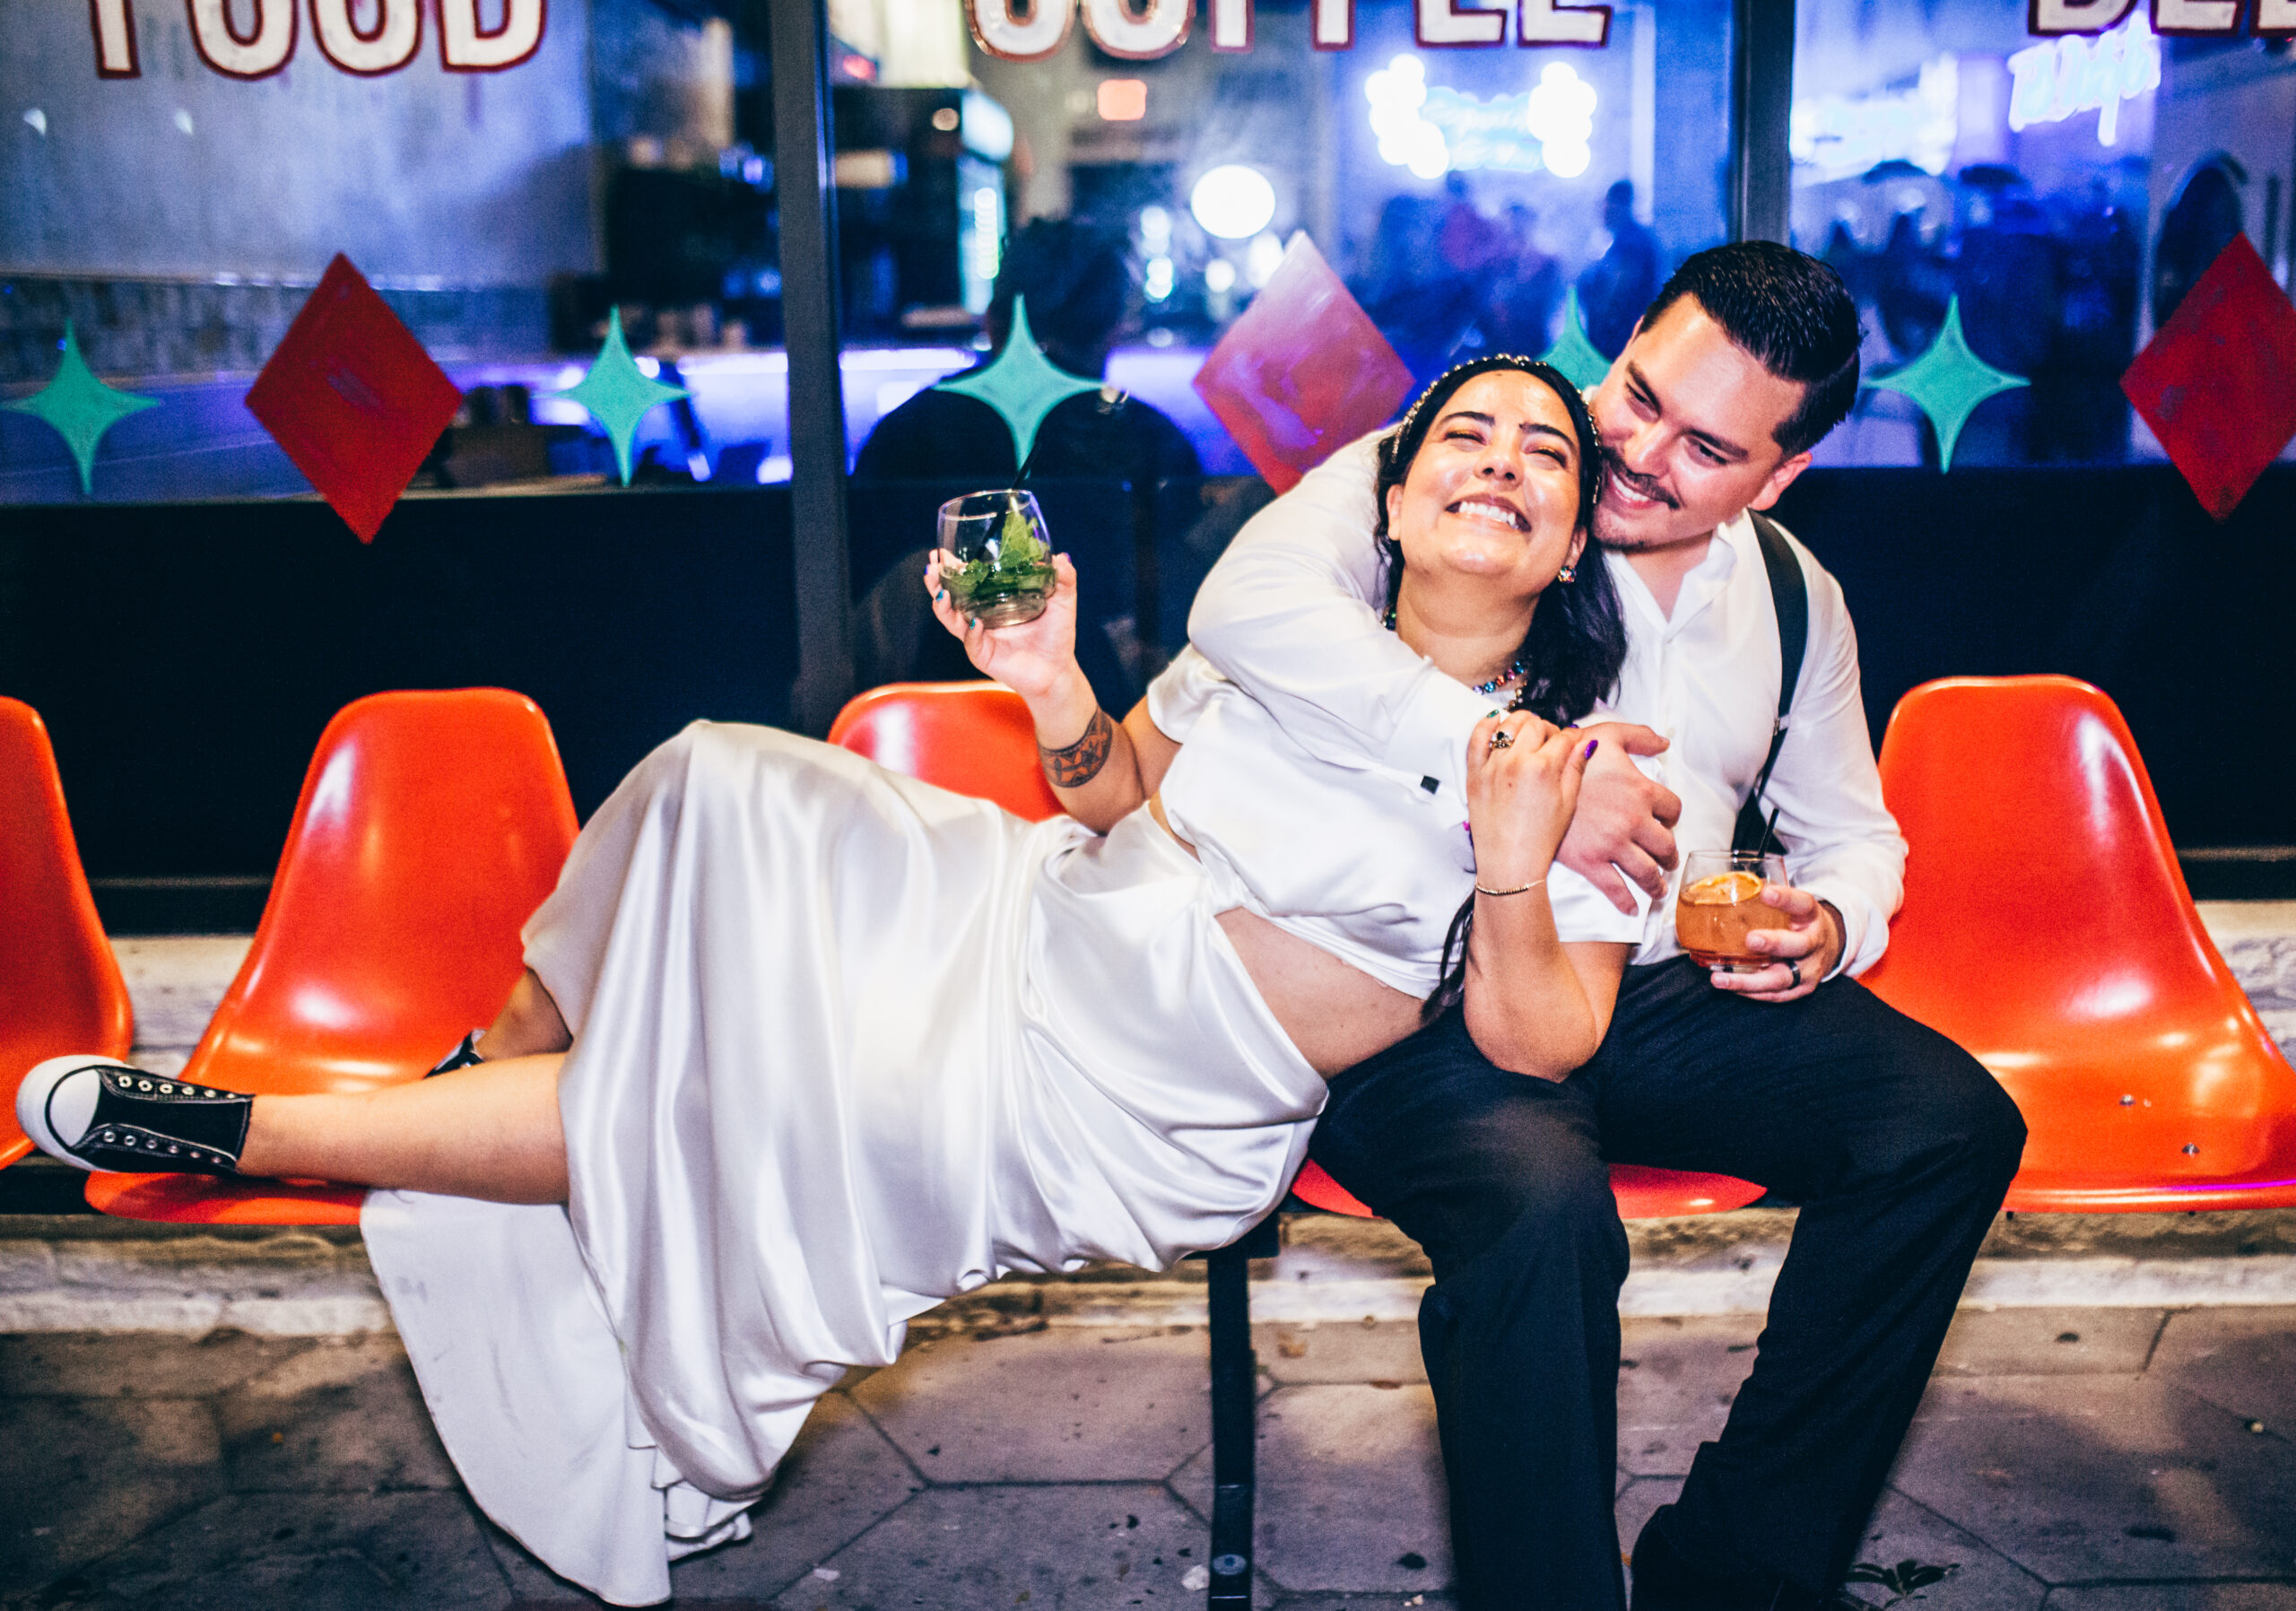 A bride laying across a row or orange bowling alley type seating, holding a stemless wine glass containing mint leaves, she is leaning into a groom
Groom sitting with his arm around the bride smiling, holding a stemless wine glass containing an orange slice and orange drink